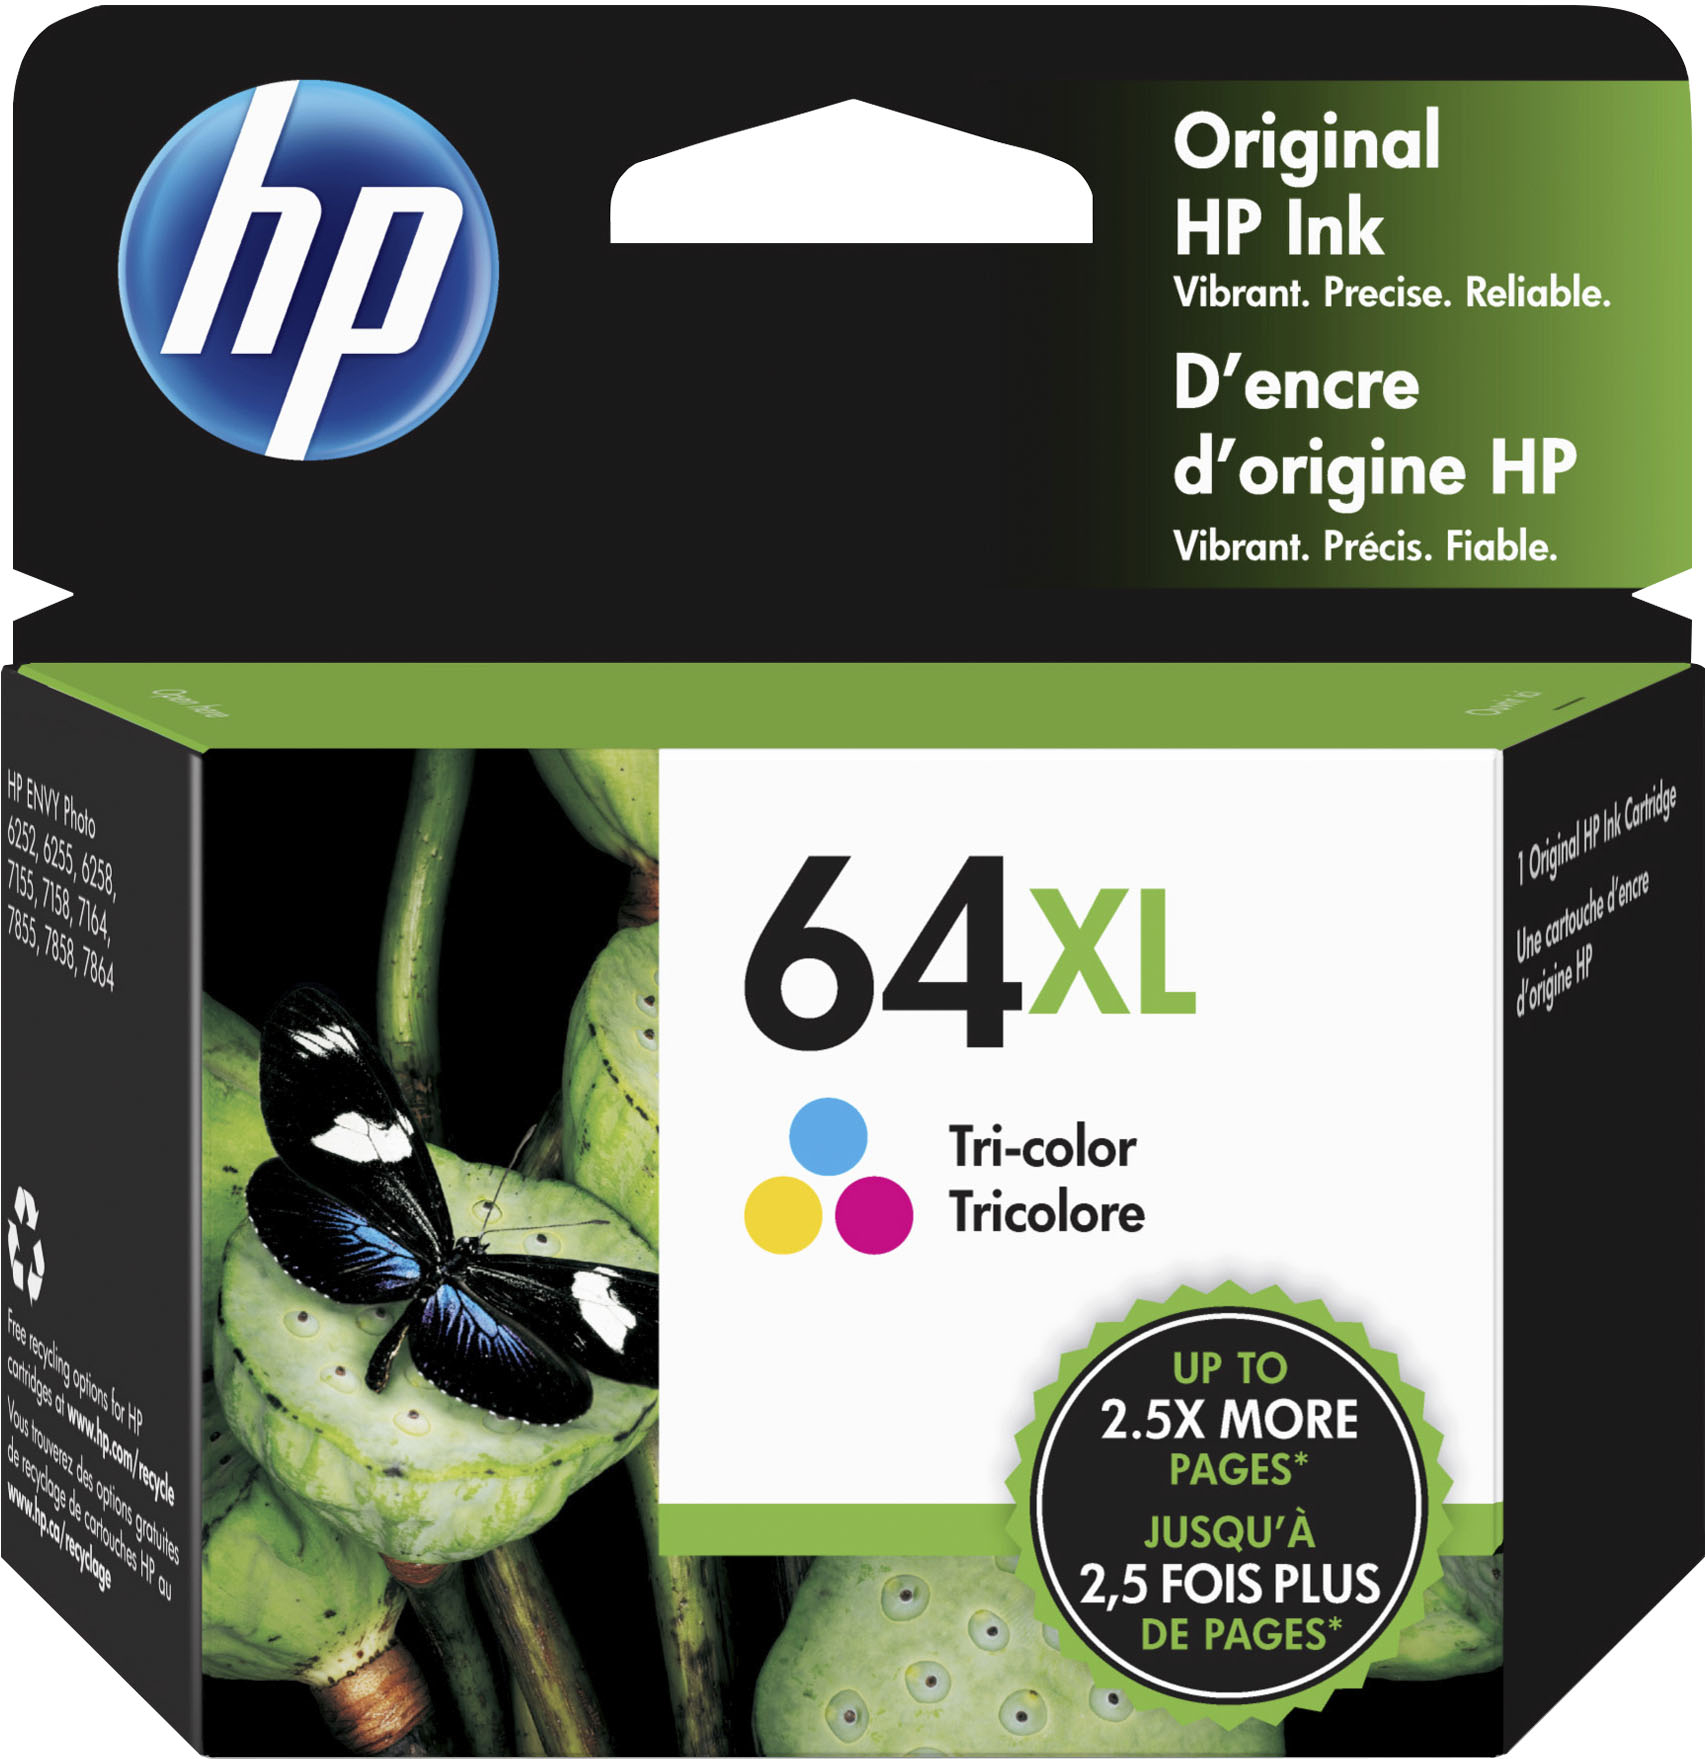 XL ink cartridge from HP (more than double the price) next to the normal  cartridge. : r/assholedesign